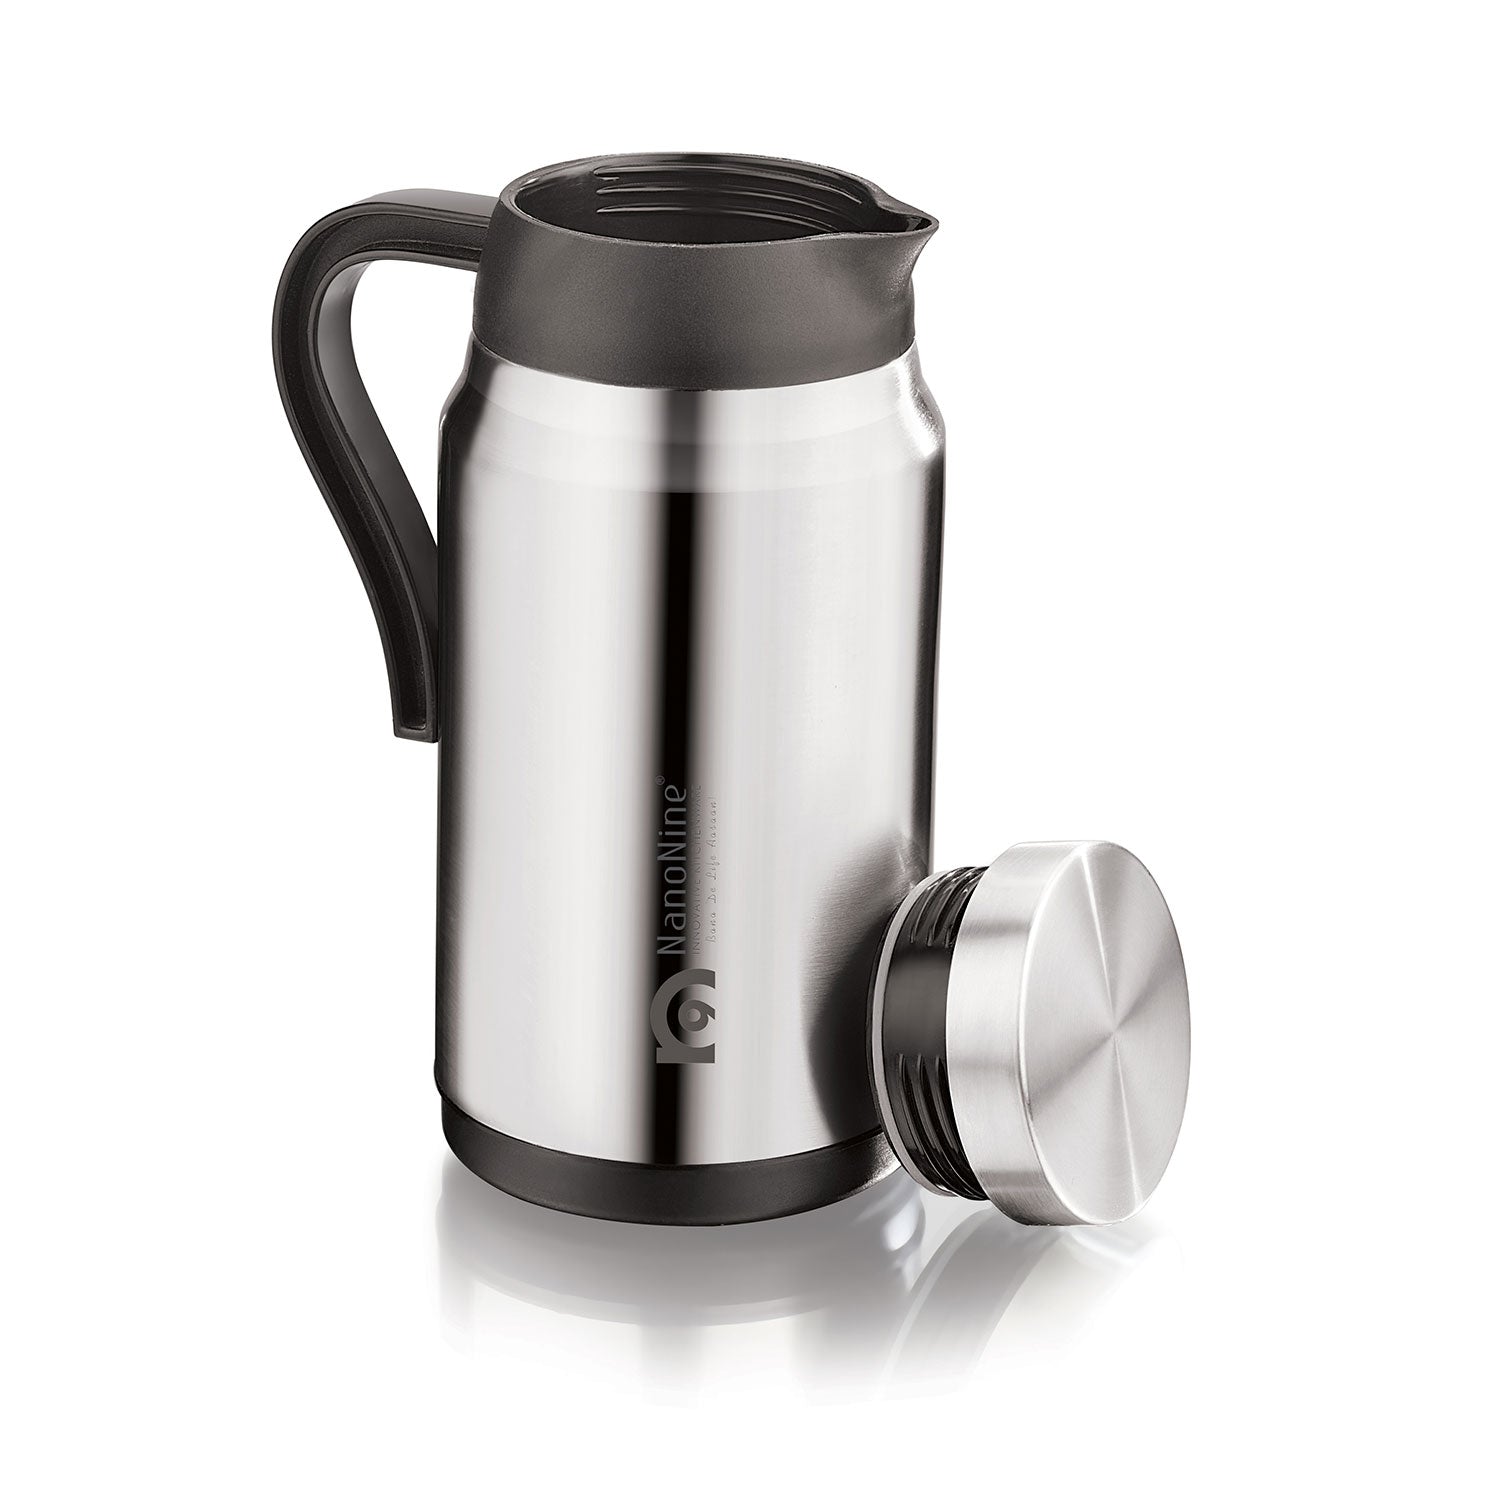 NanoNine T-Café 800 ml Double Wall Insulated Stainless Steel Flask.